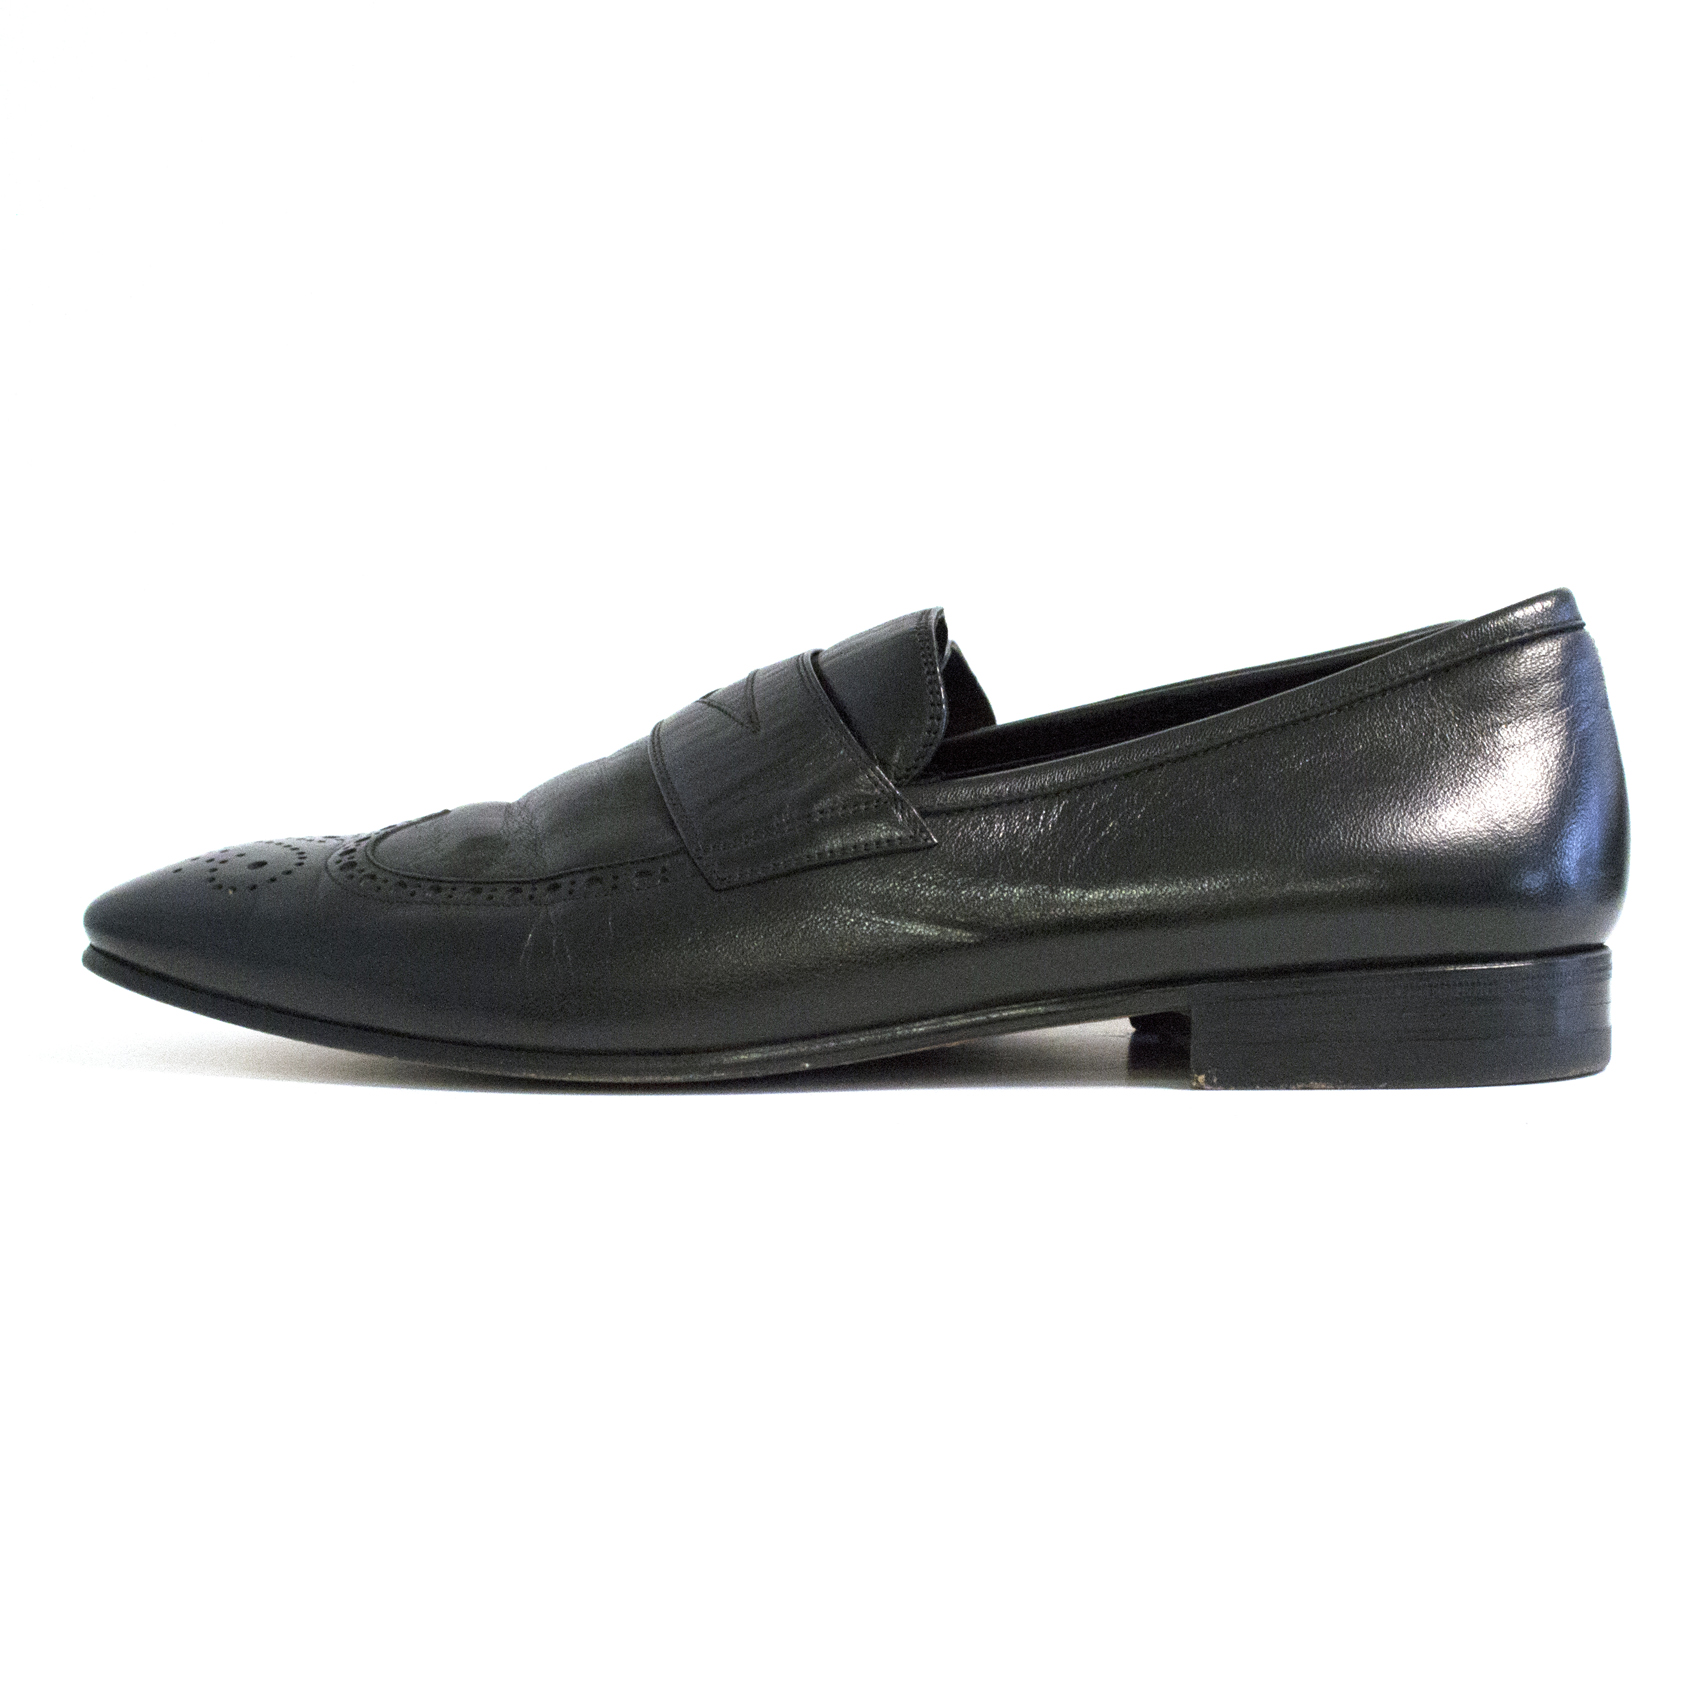 Yves Saint Laurent Black Leather Loafers | HEWI